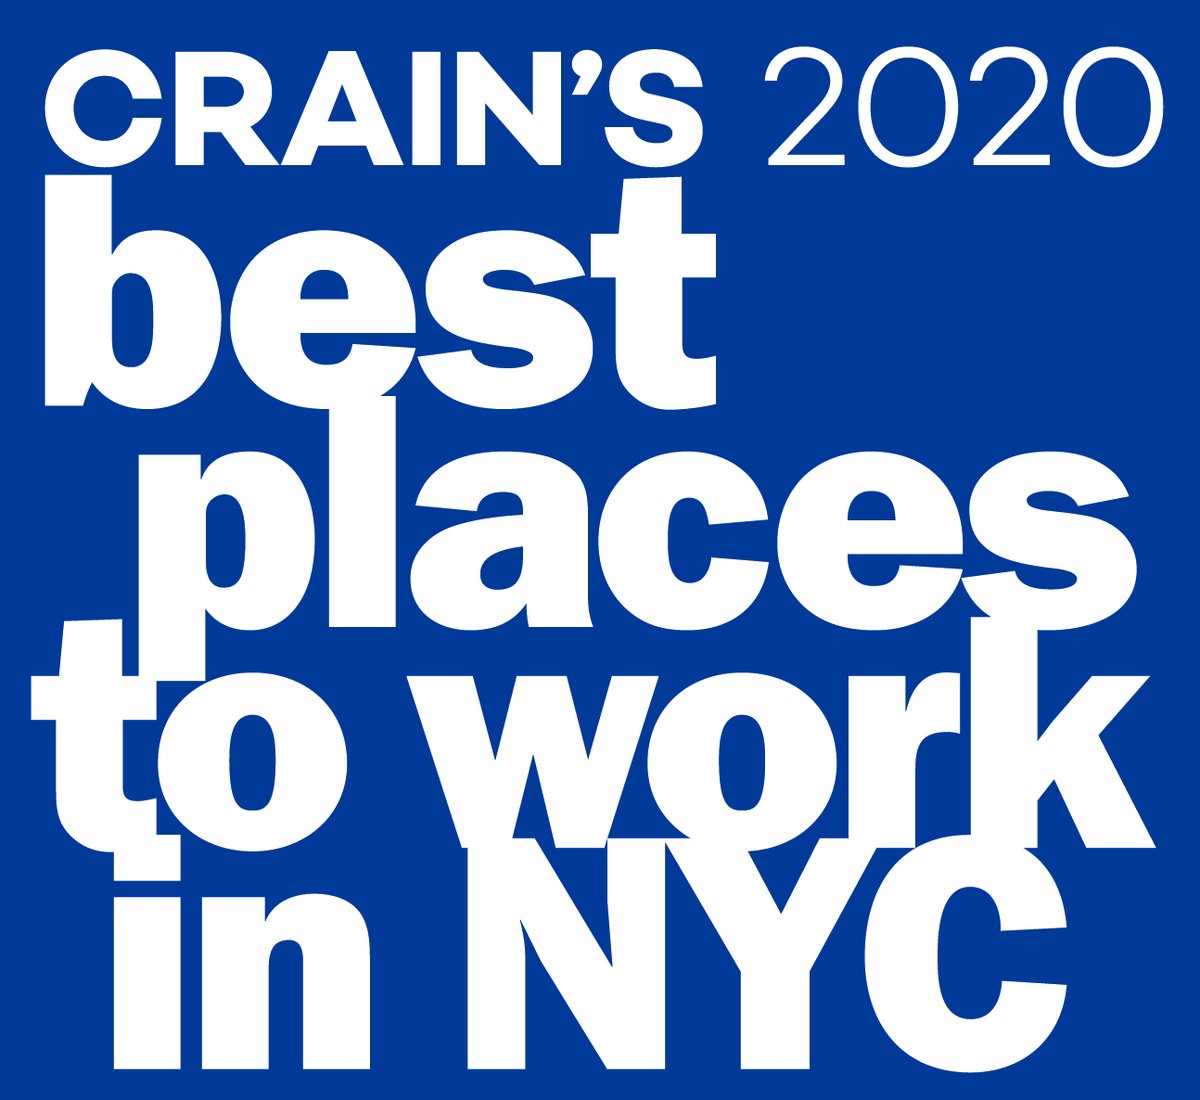 Congrats to our New York office for being named one of the '2020 100 Best Places to Work' in NYC by @crainsnewyork for the second consecutive year! #TeamCBIZ #CrainsNY